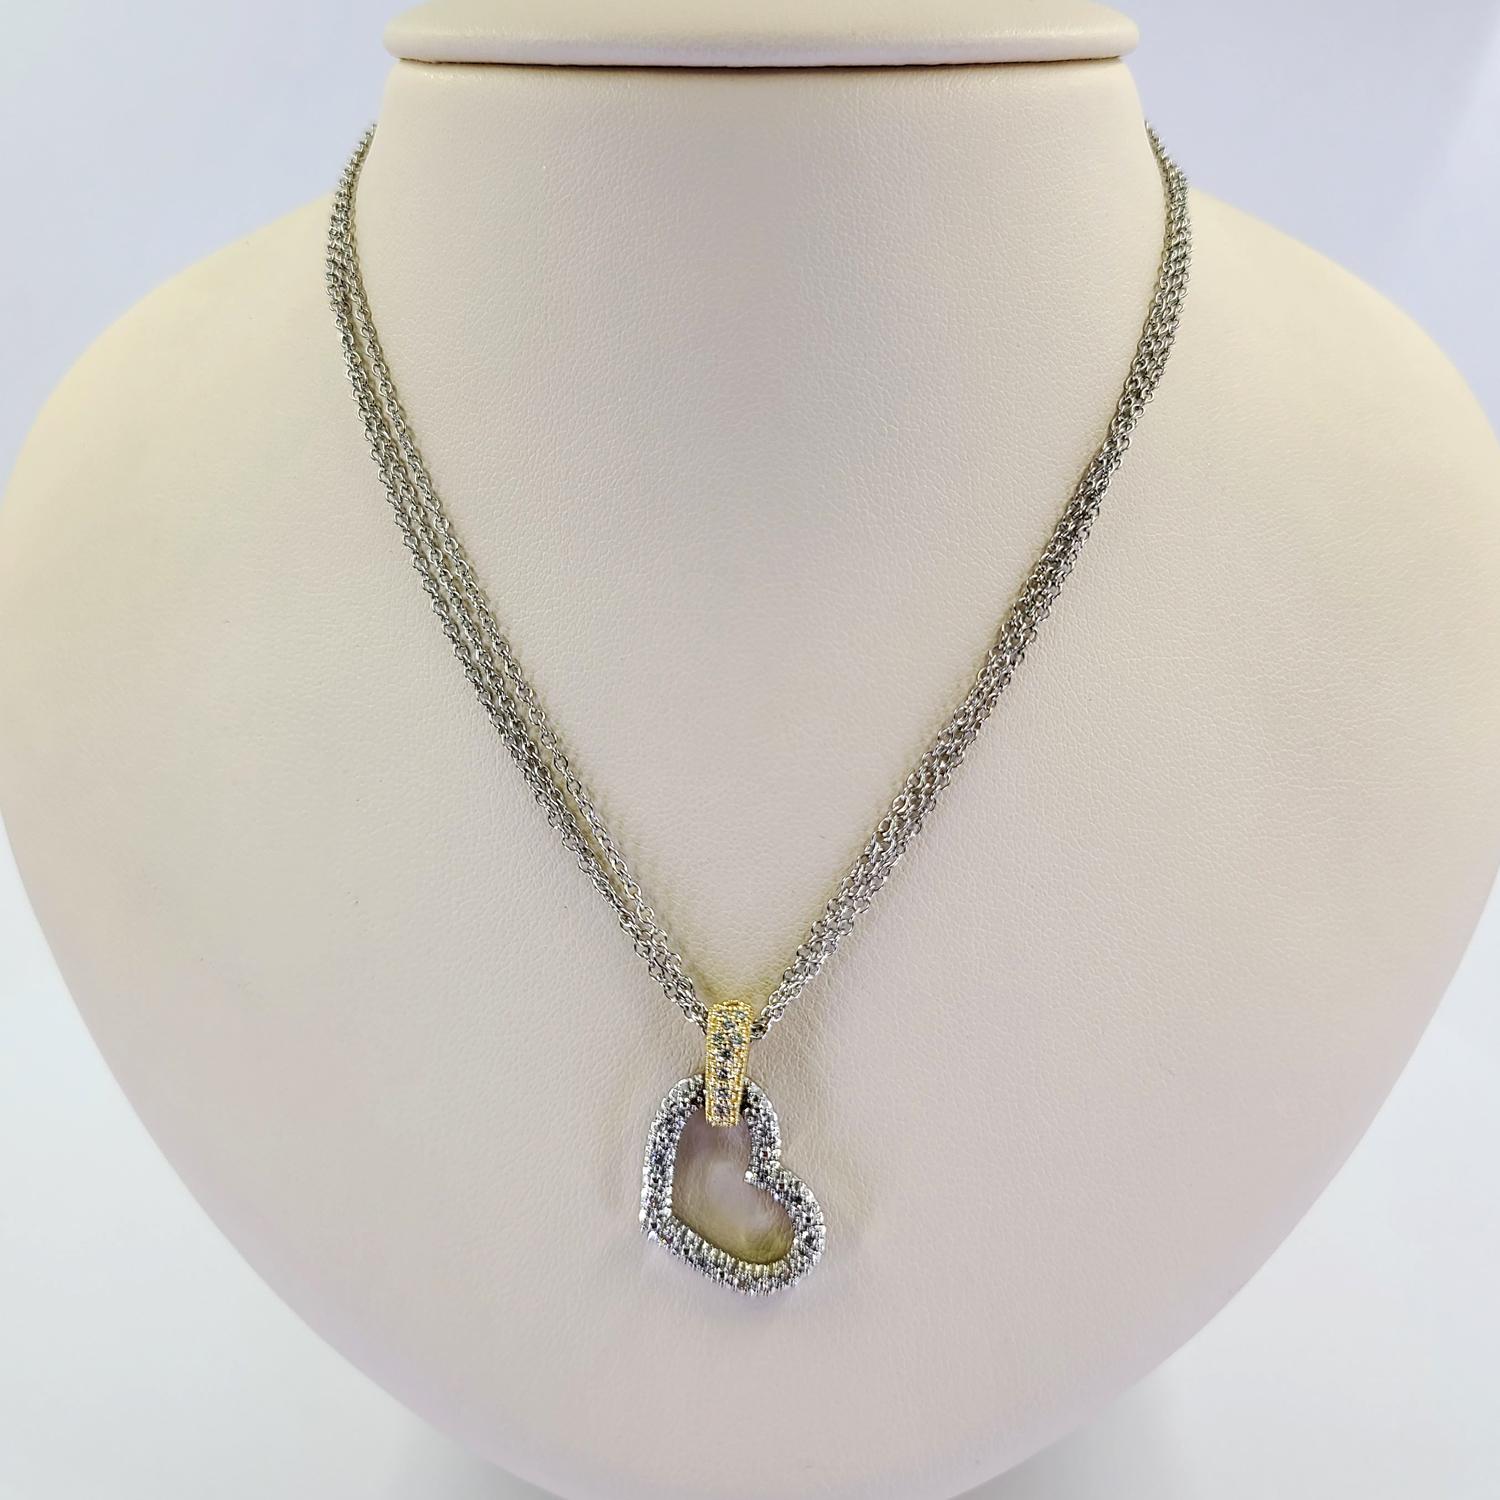 14 Karat White Gold Triple Chain Necklace with Pave Heart Pendant and Yellow Gold Bale Featuring 25 Round Diamonds of SI Clarity and H Color Totaling 0.25 Carats. 16 Inches Long with Lobster Clasp. Finished Weight Is 8 Grams.